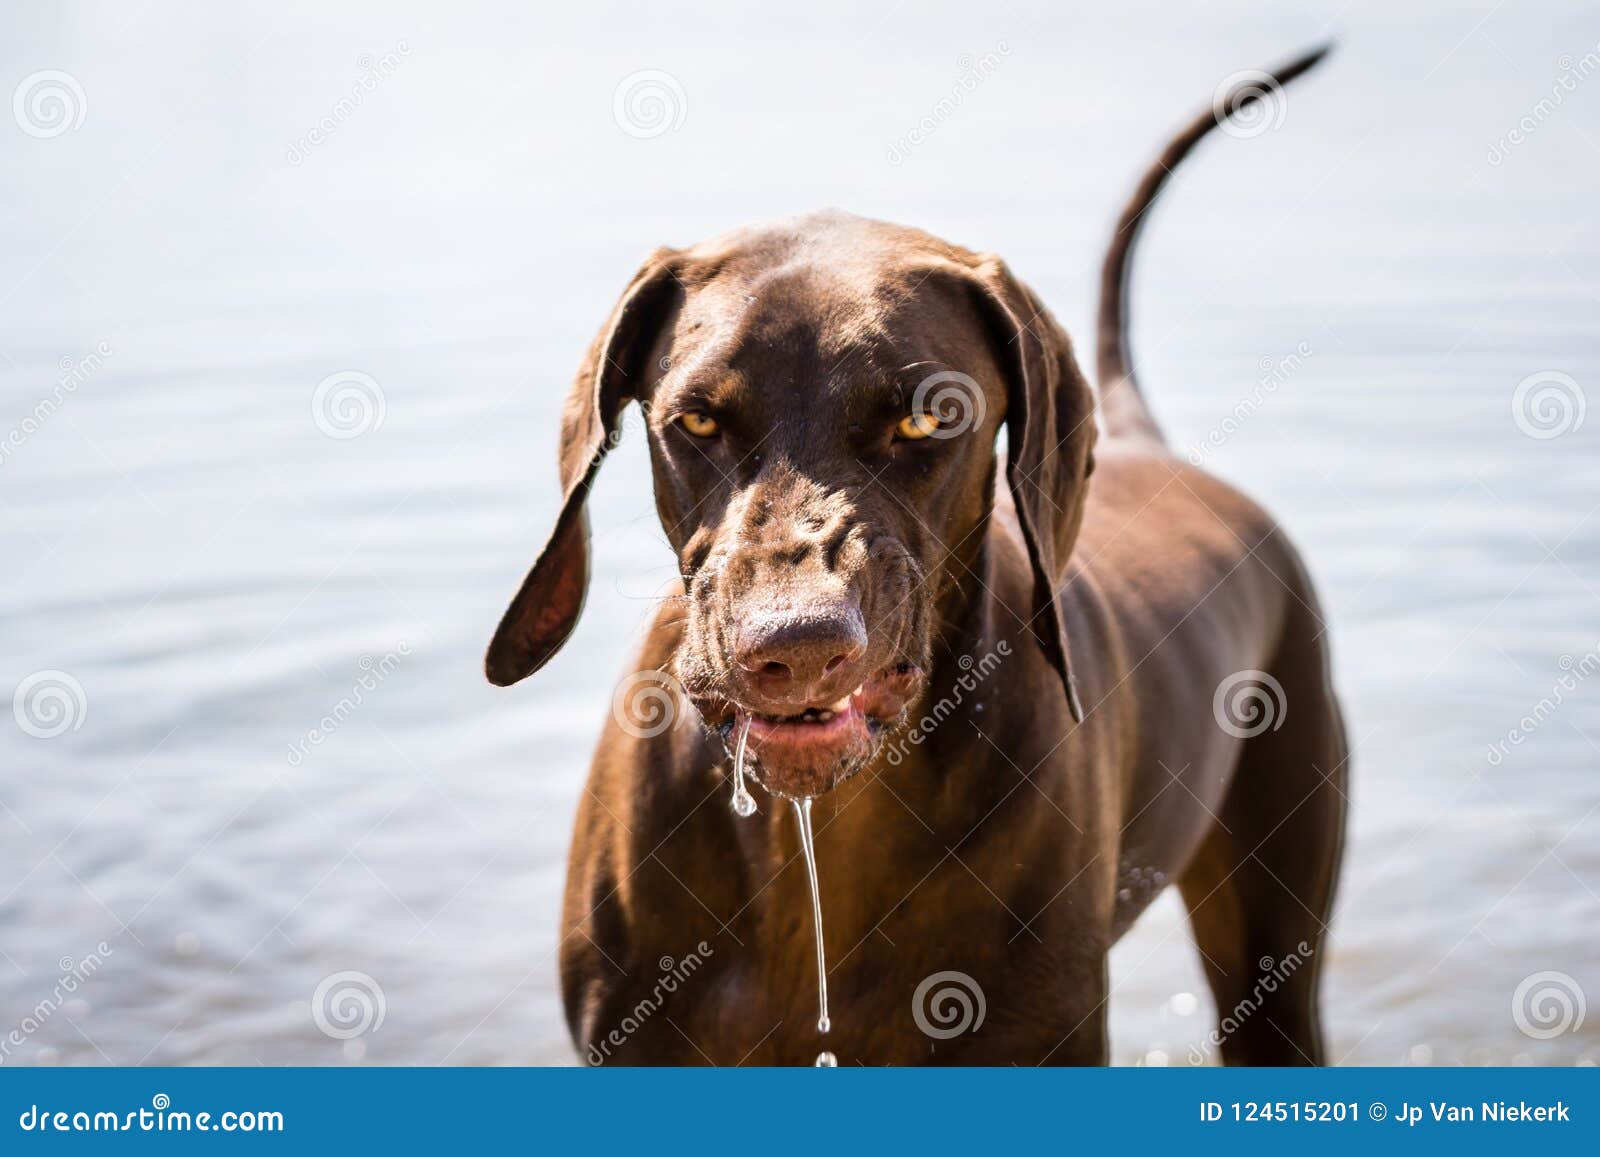 Brown Pointer Dog With An Aggresive Expression With Water Dripping Down Its Face Stock Image Image Of Danger Brown 124515201